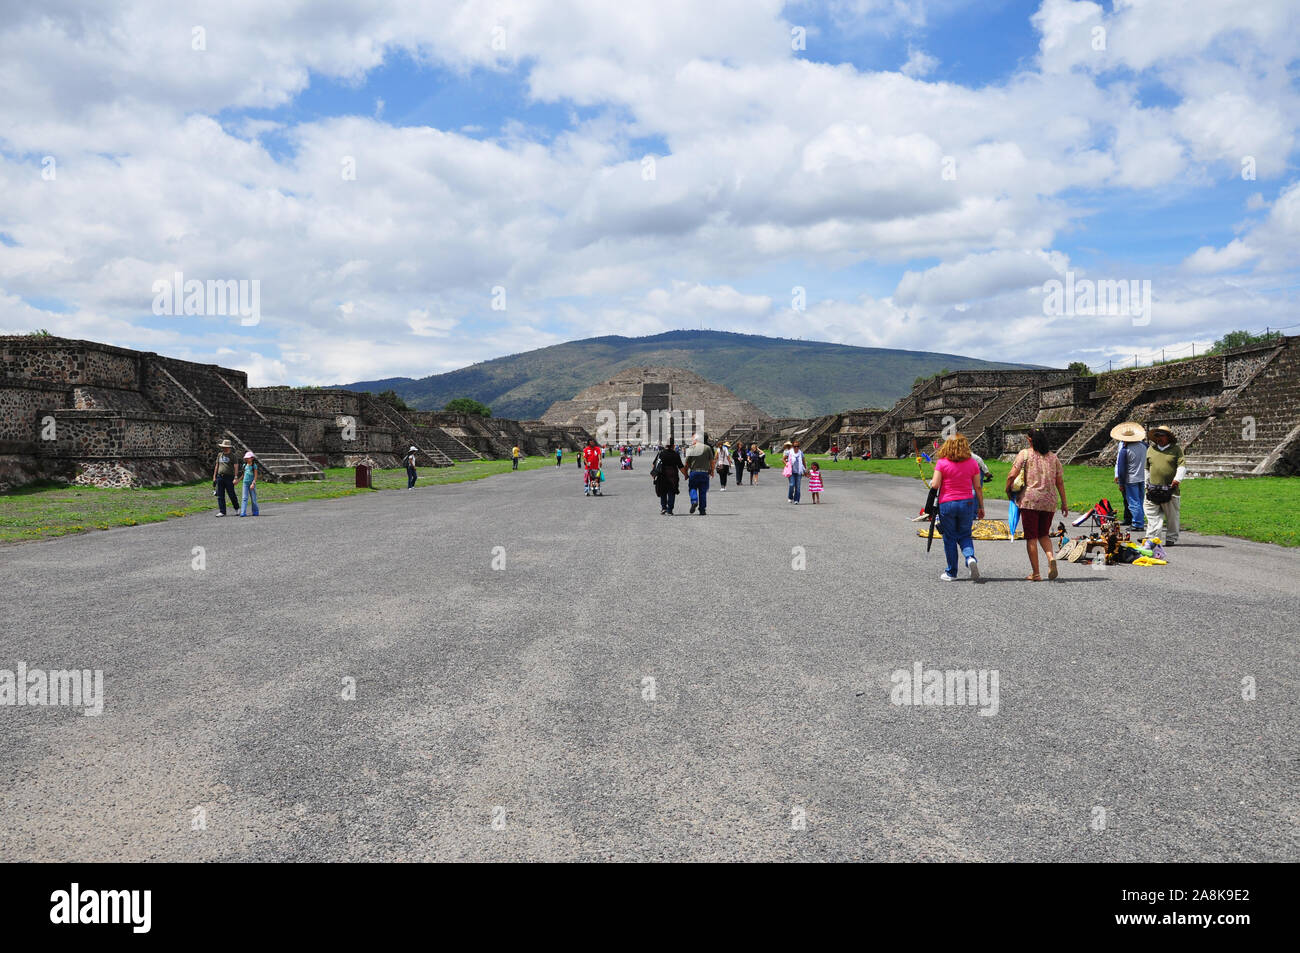 Teotihuacan,Mexico - July 06, 2011: View of the pyramid of the moon at aztec pyramid Teotihuacan, ancient Mesoamerican city in Mexico, locat Stock Photo